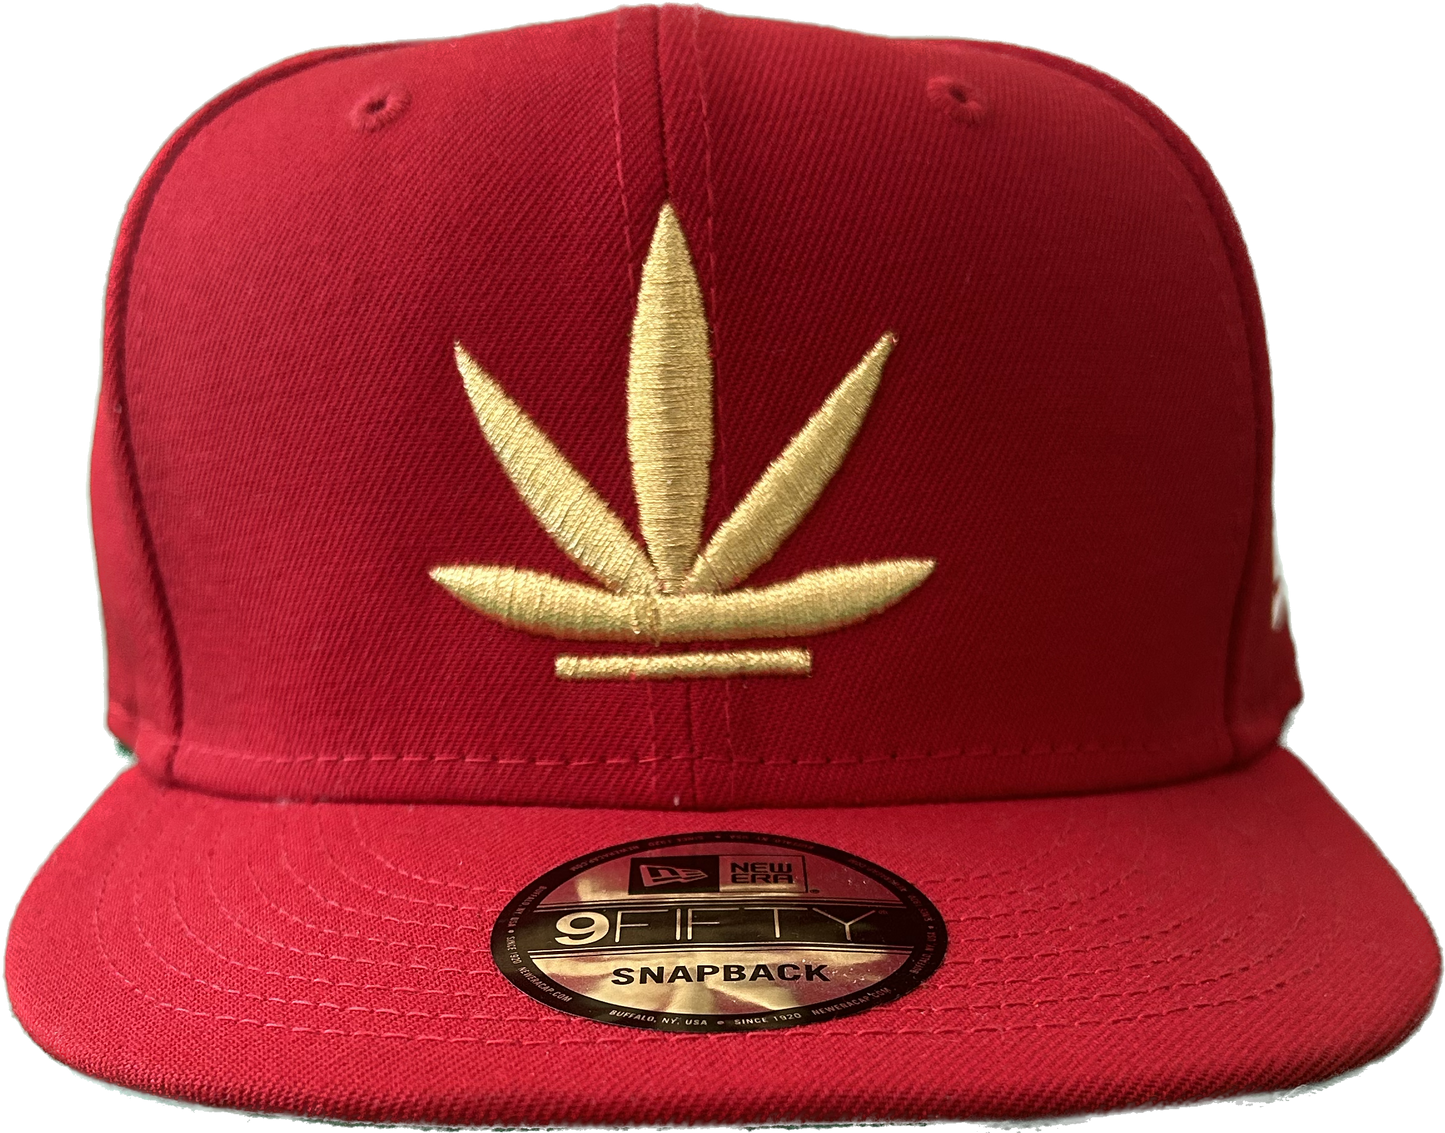 “The Chronn” Level Red and Gold Snapback